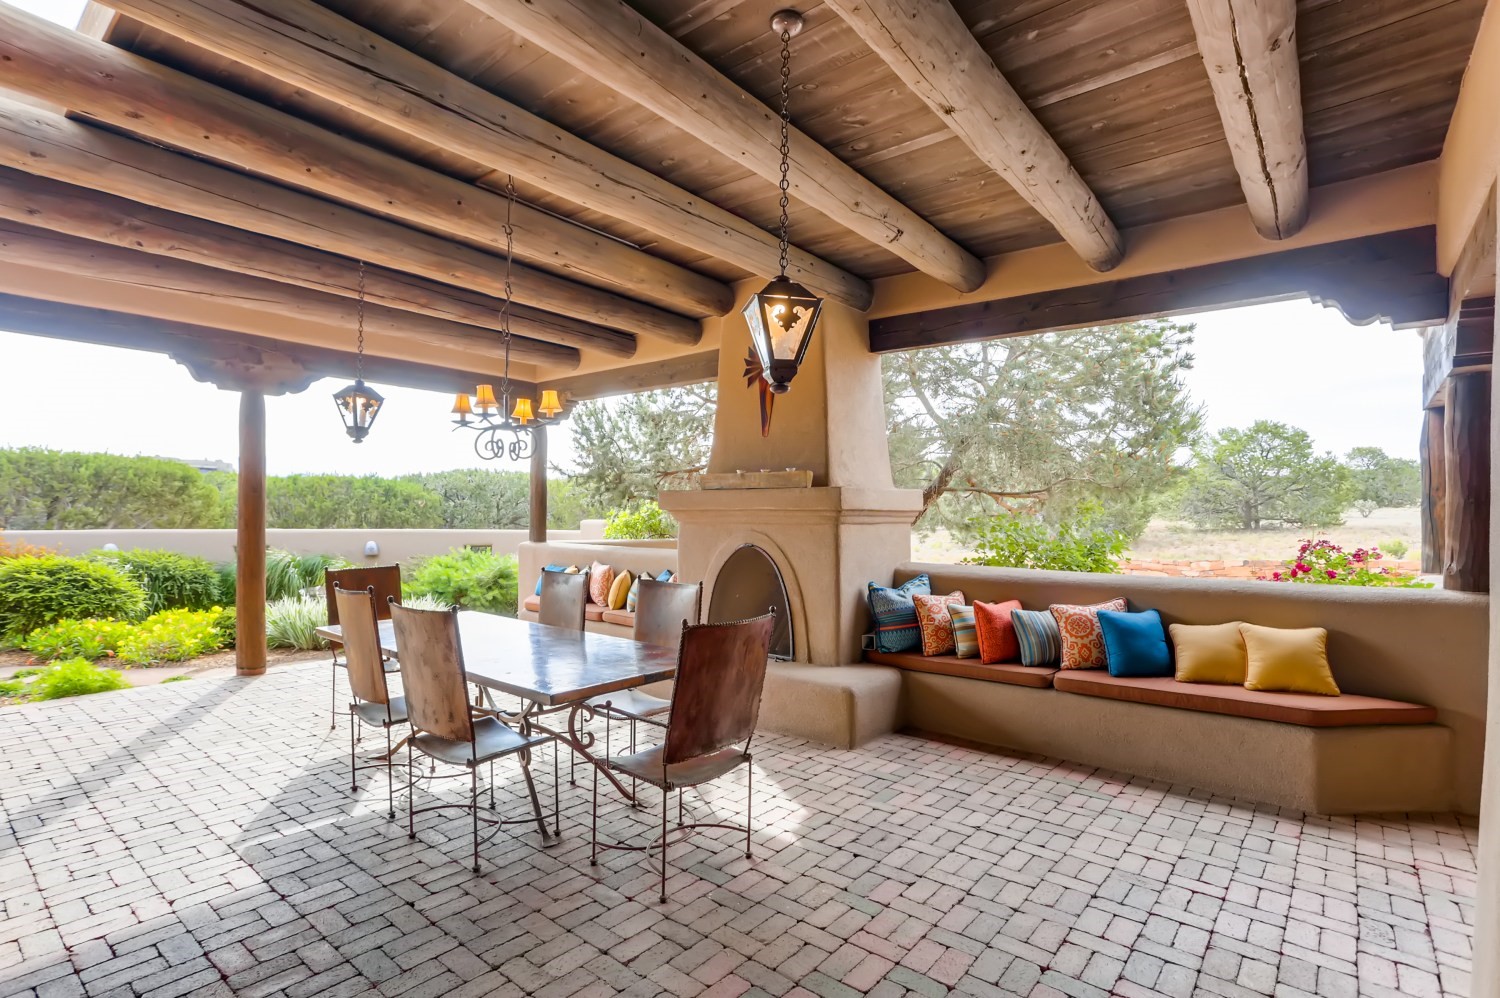 Enjoy indoor-outdoor living at its finest with the grand covered patio